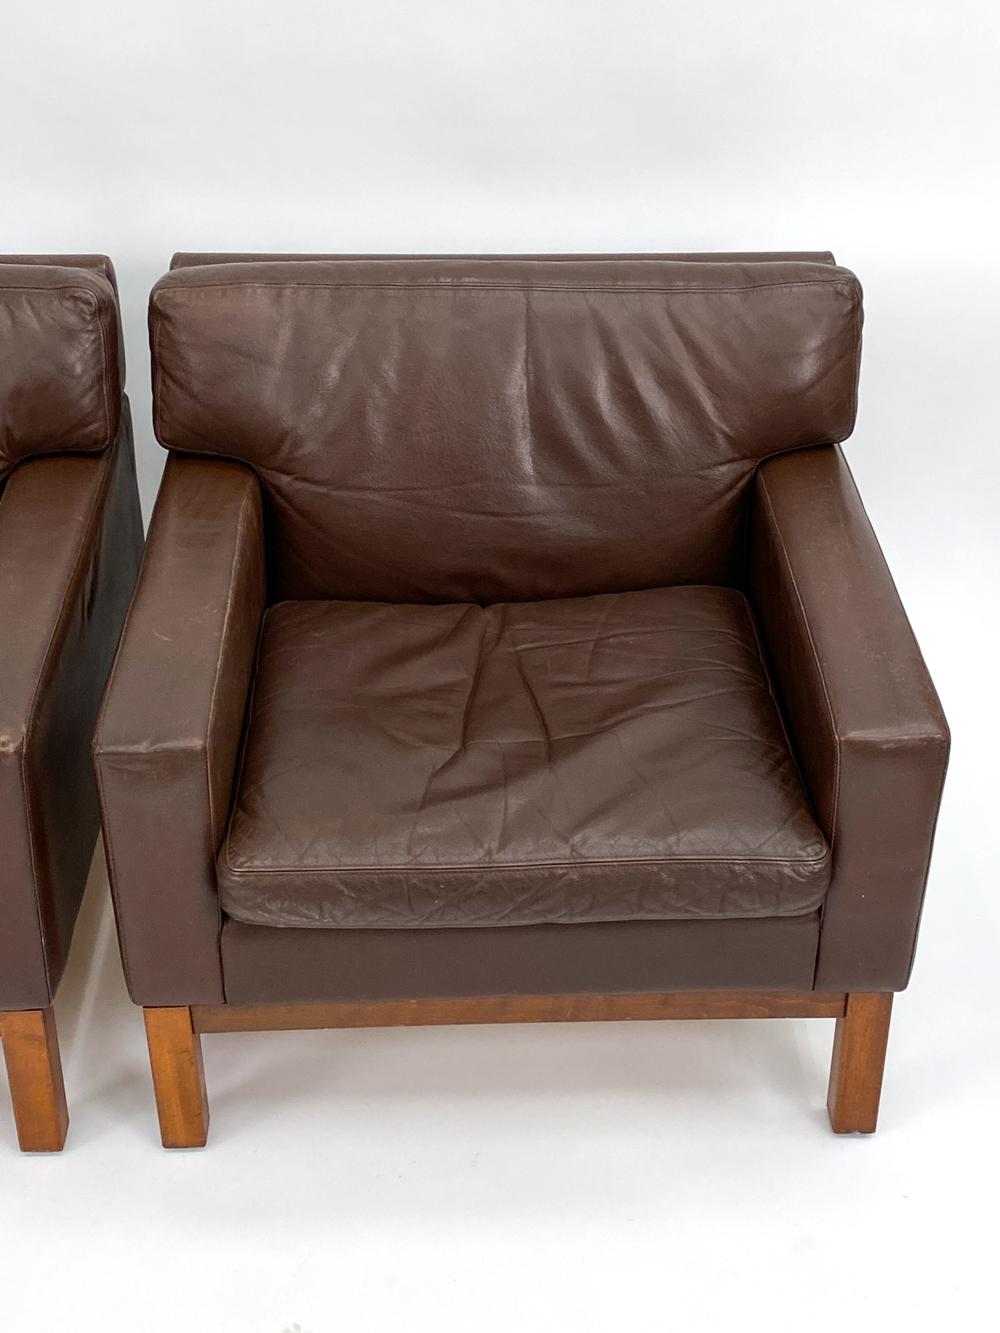 20th Century Pair of Peem Finland Beech & Leather Club Chairs  For Sale